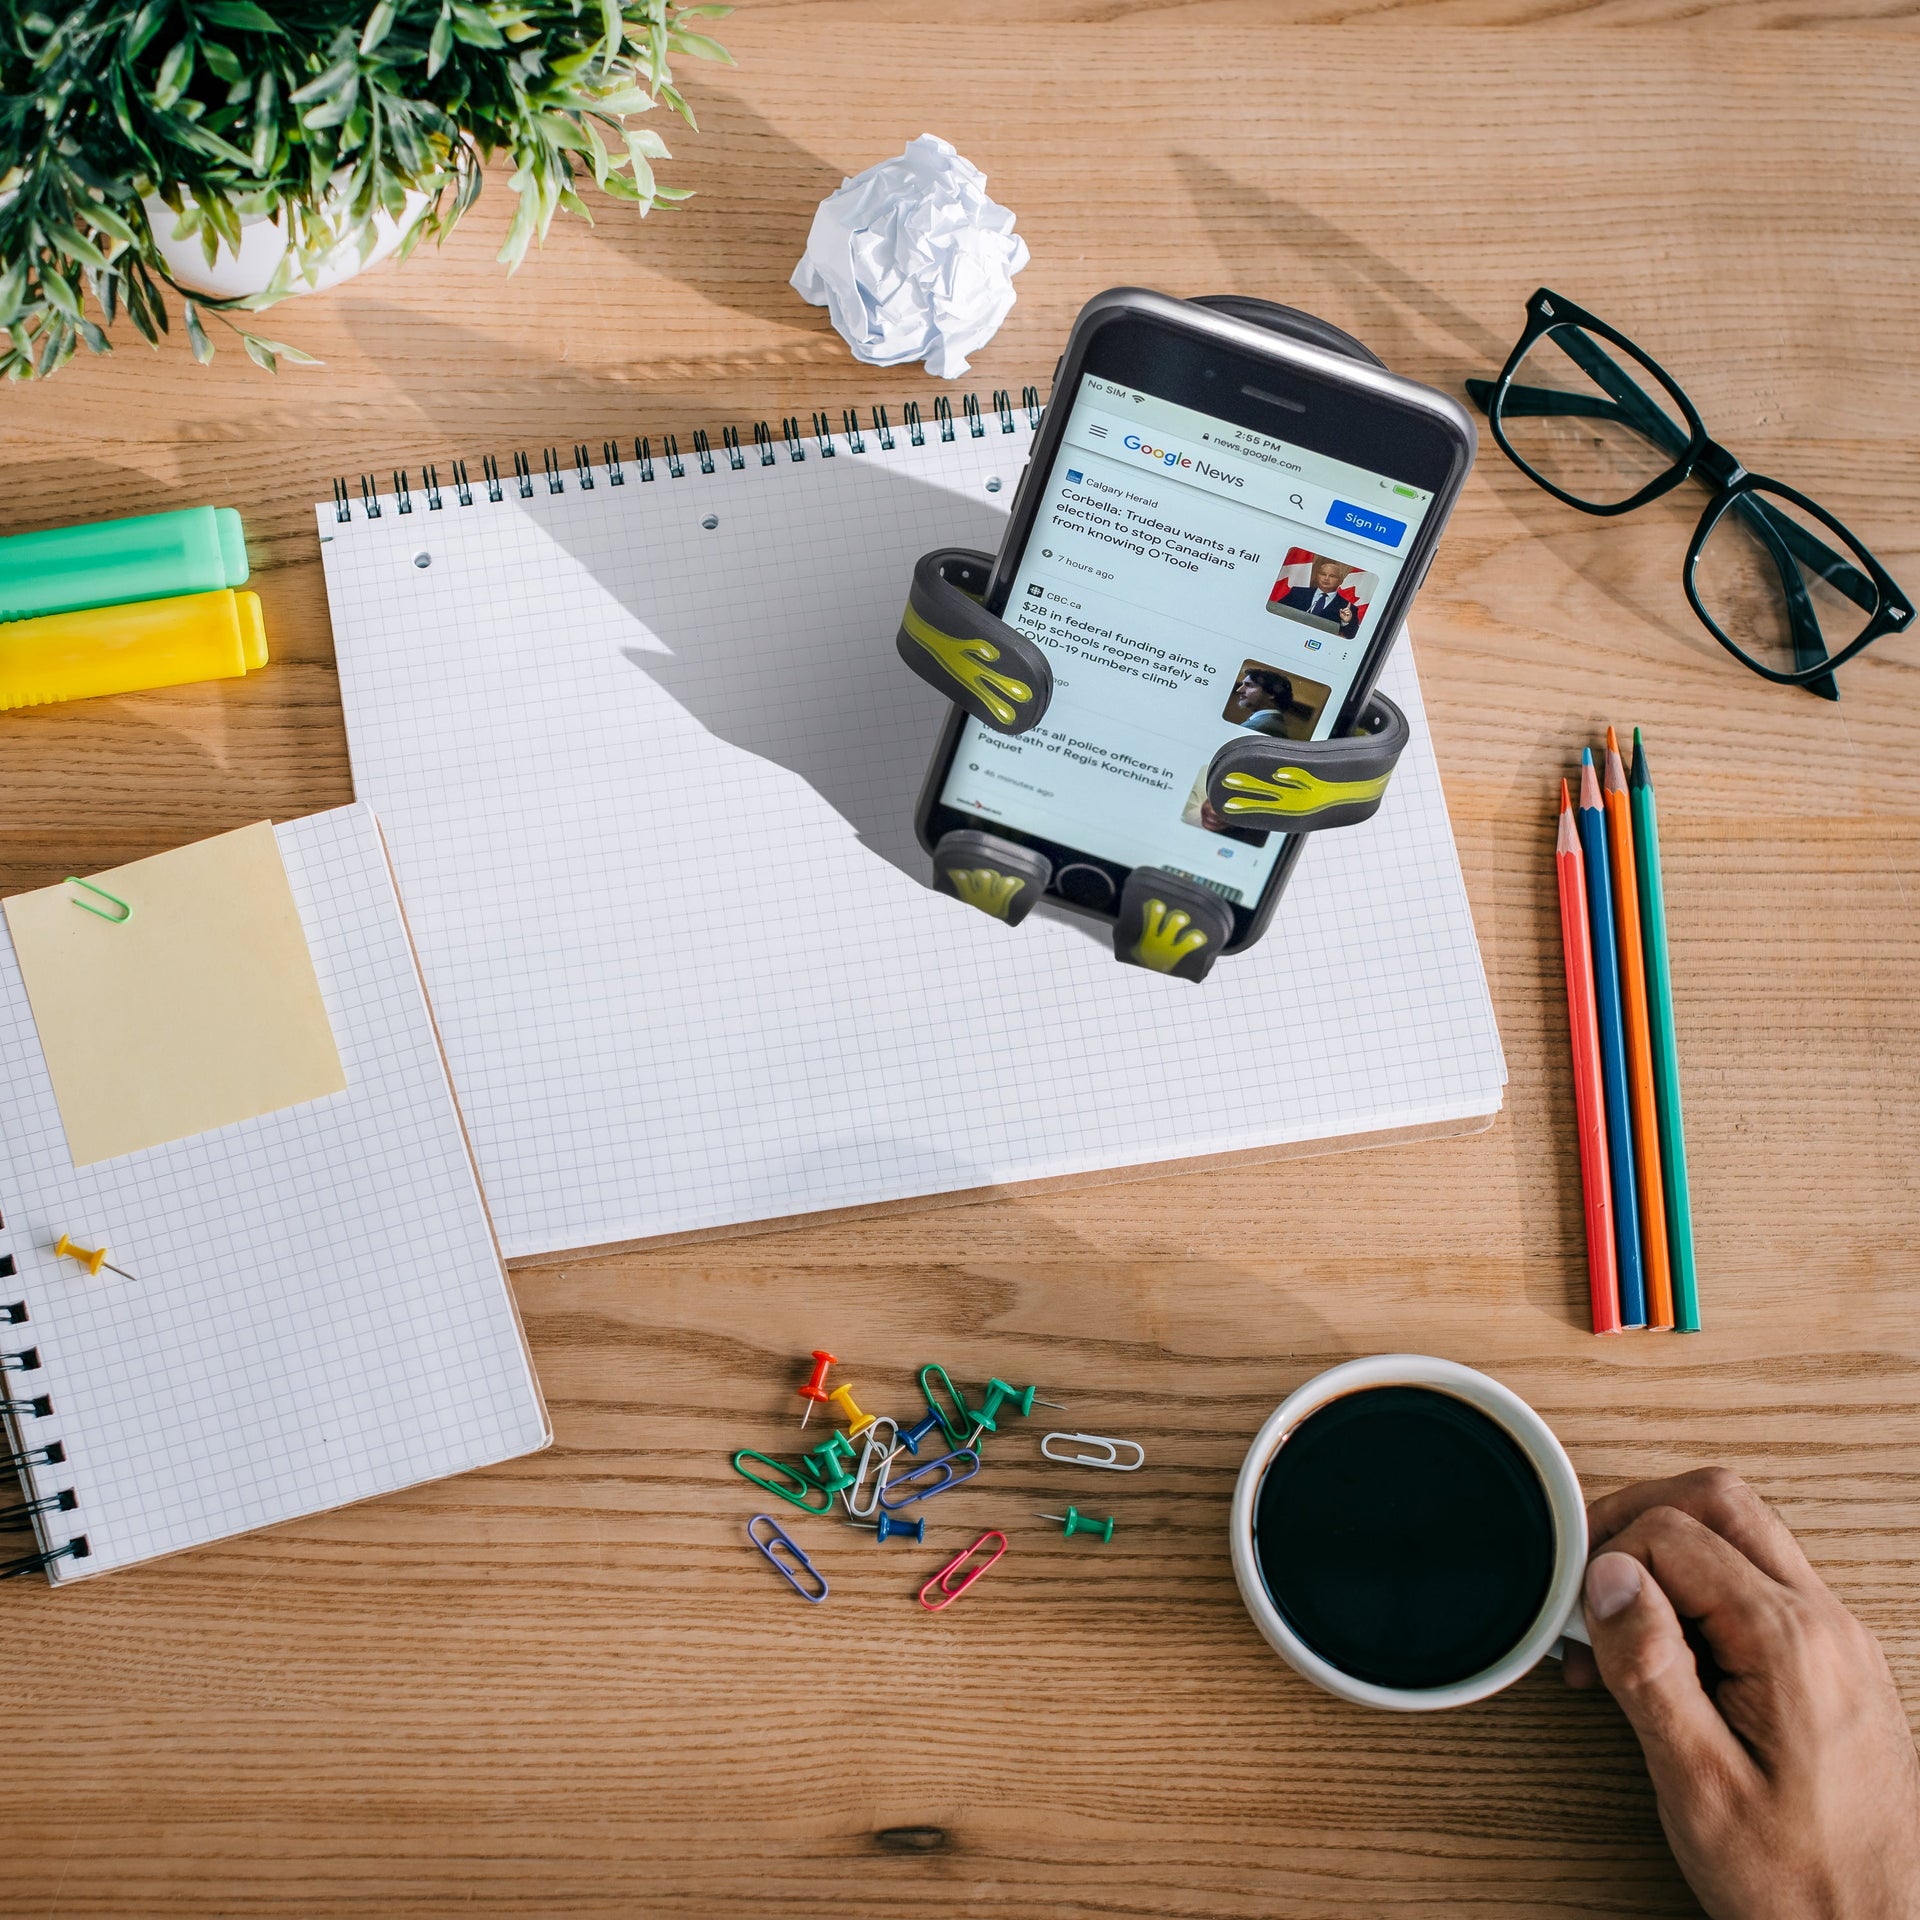 Image of Alien Hug Buddy sitting on a desk, holding a cell-phone with some news on the screen. A hand reaches in from off-screen holding a cup of coffee. The desk is full of paper and pencils, ready to tackle the tasks for your work day